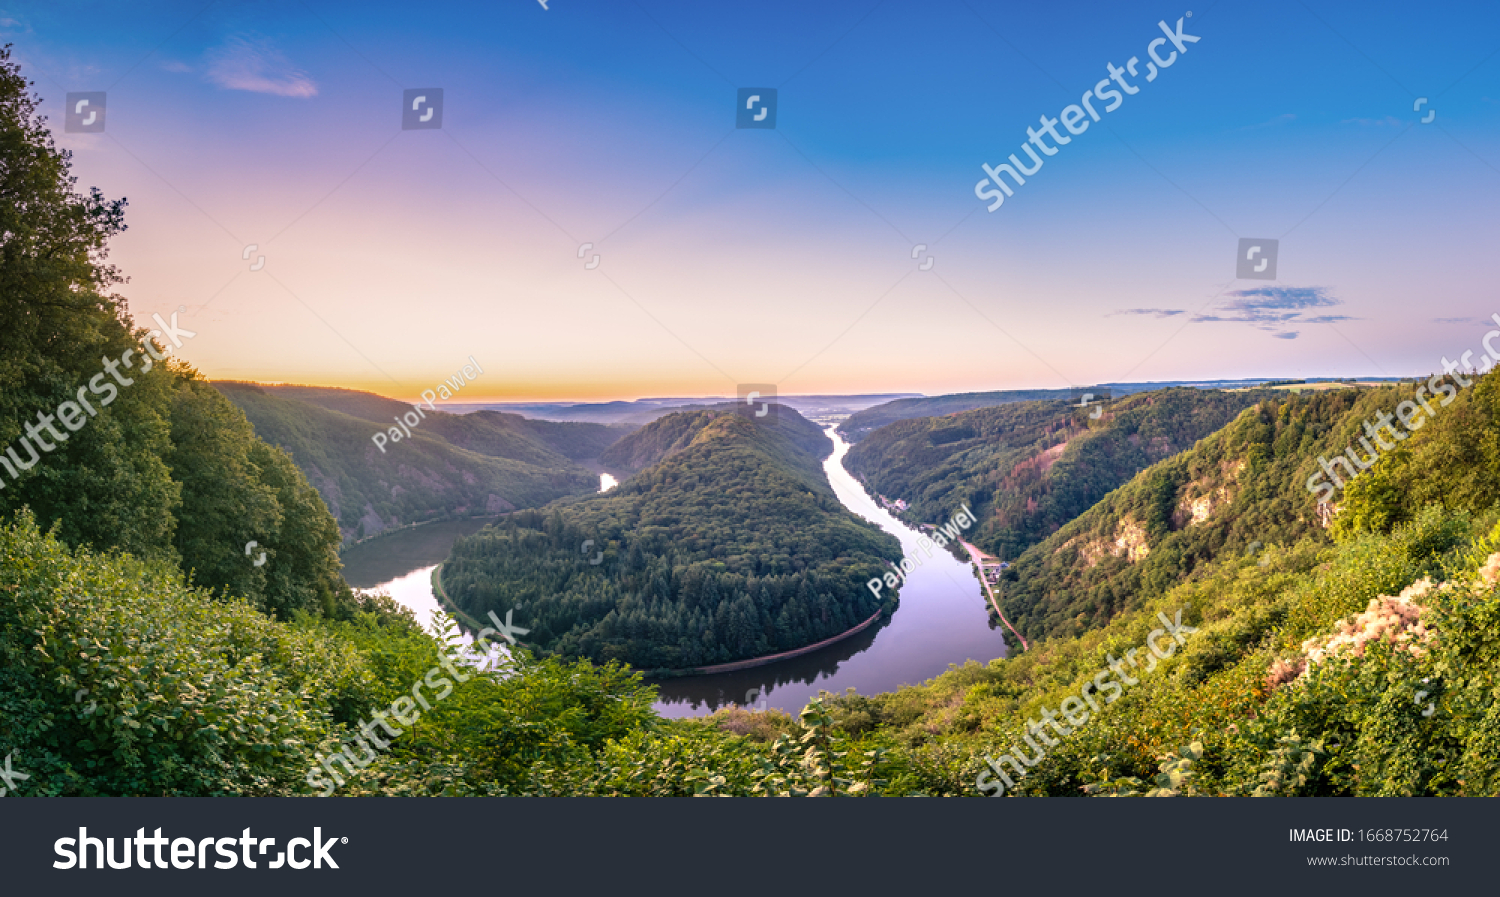 Sunset view of Saar river valley near Mettlach. South. Germany  #1668752764